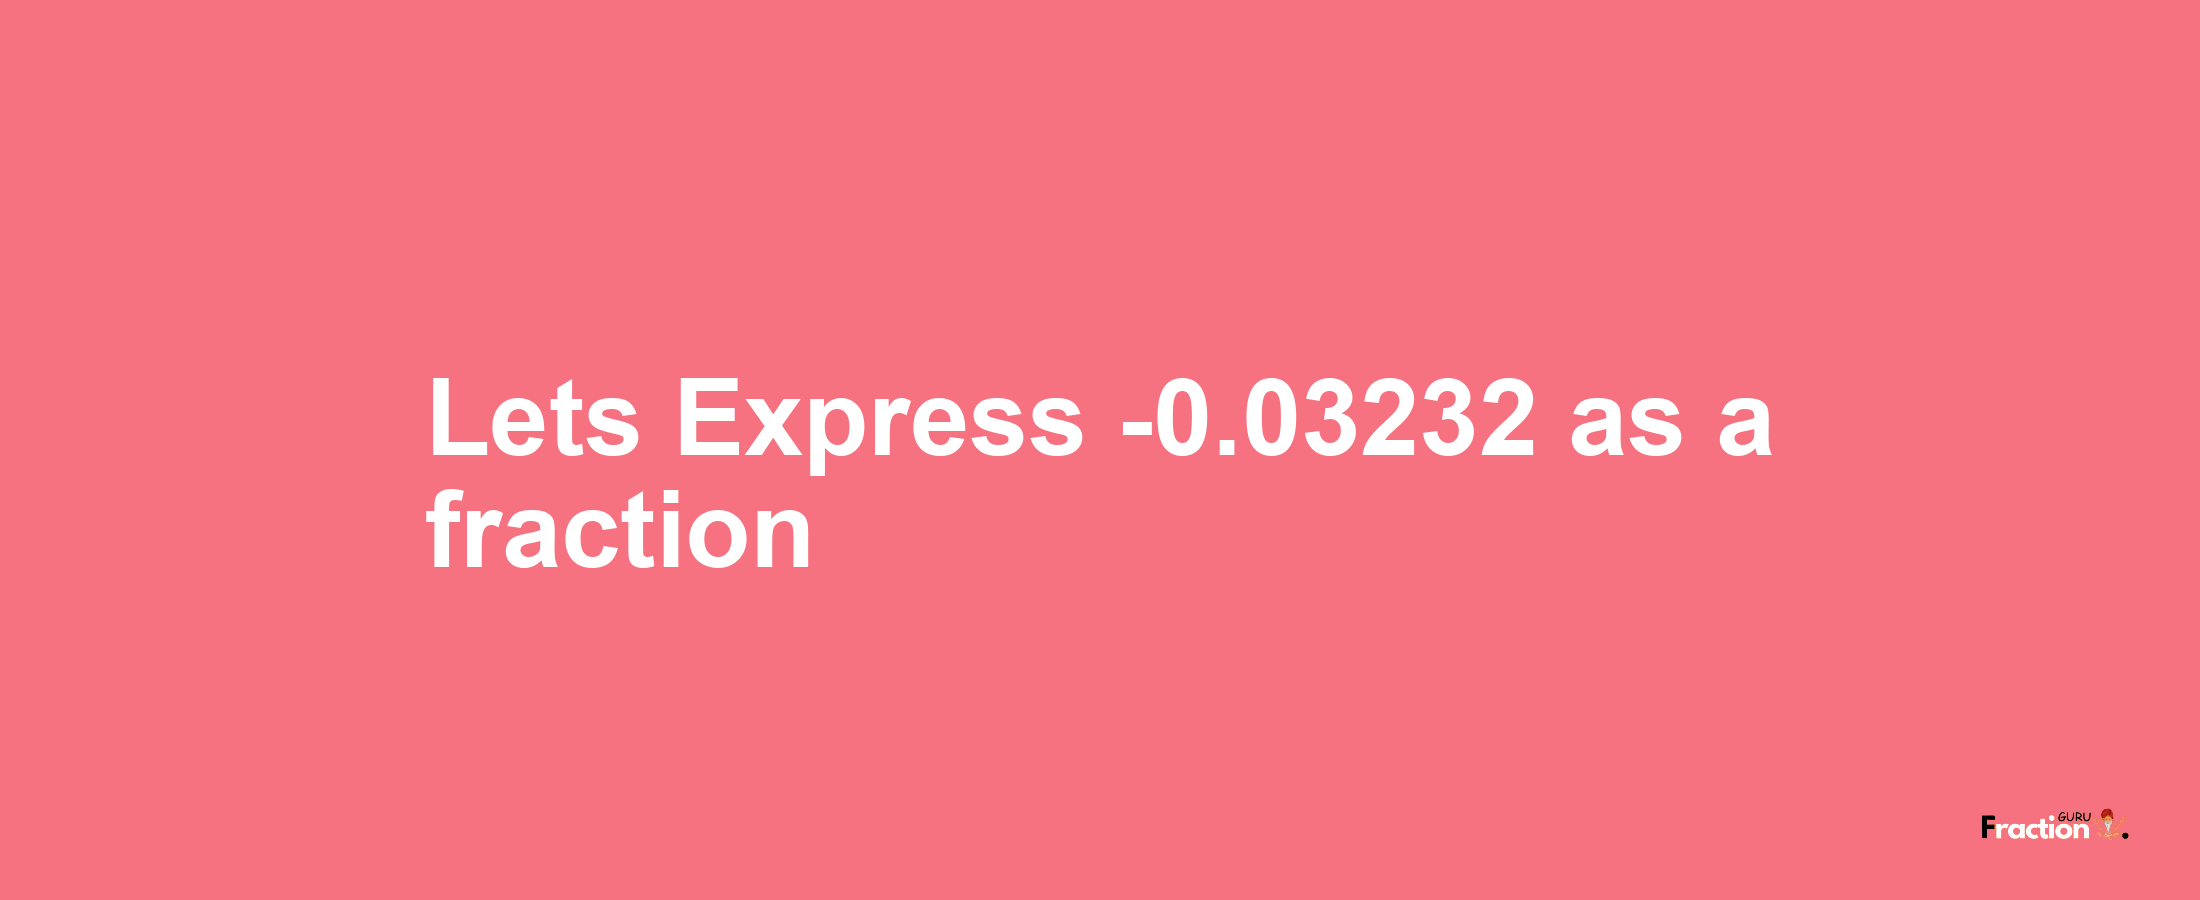 Lets Express -0.03232 as afraction